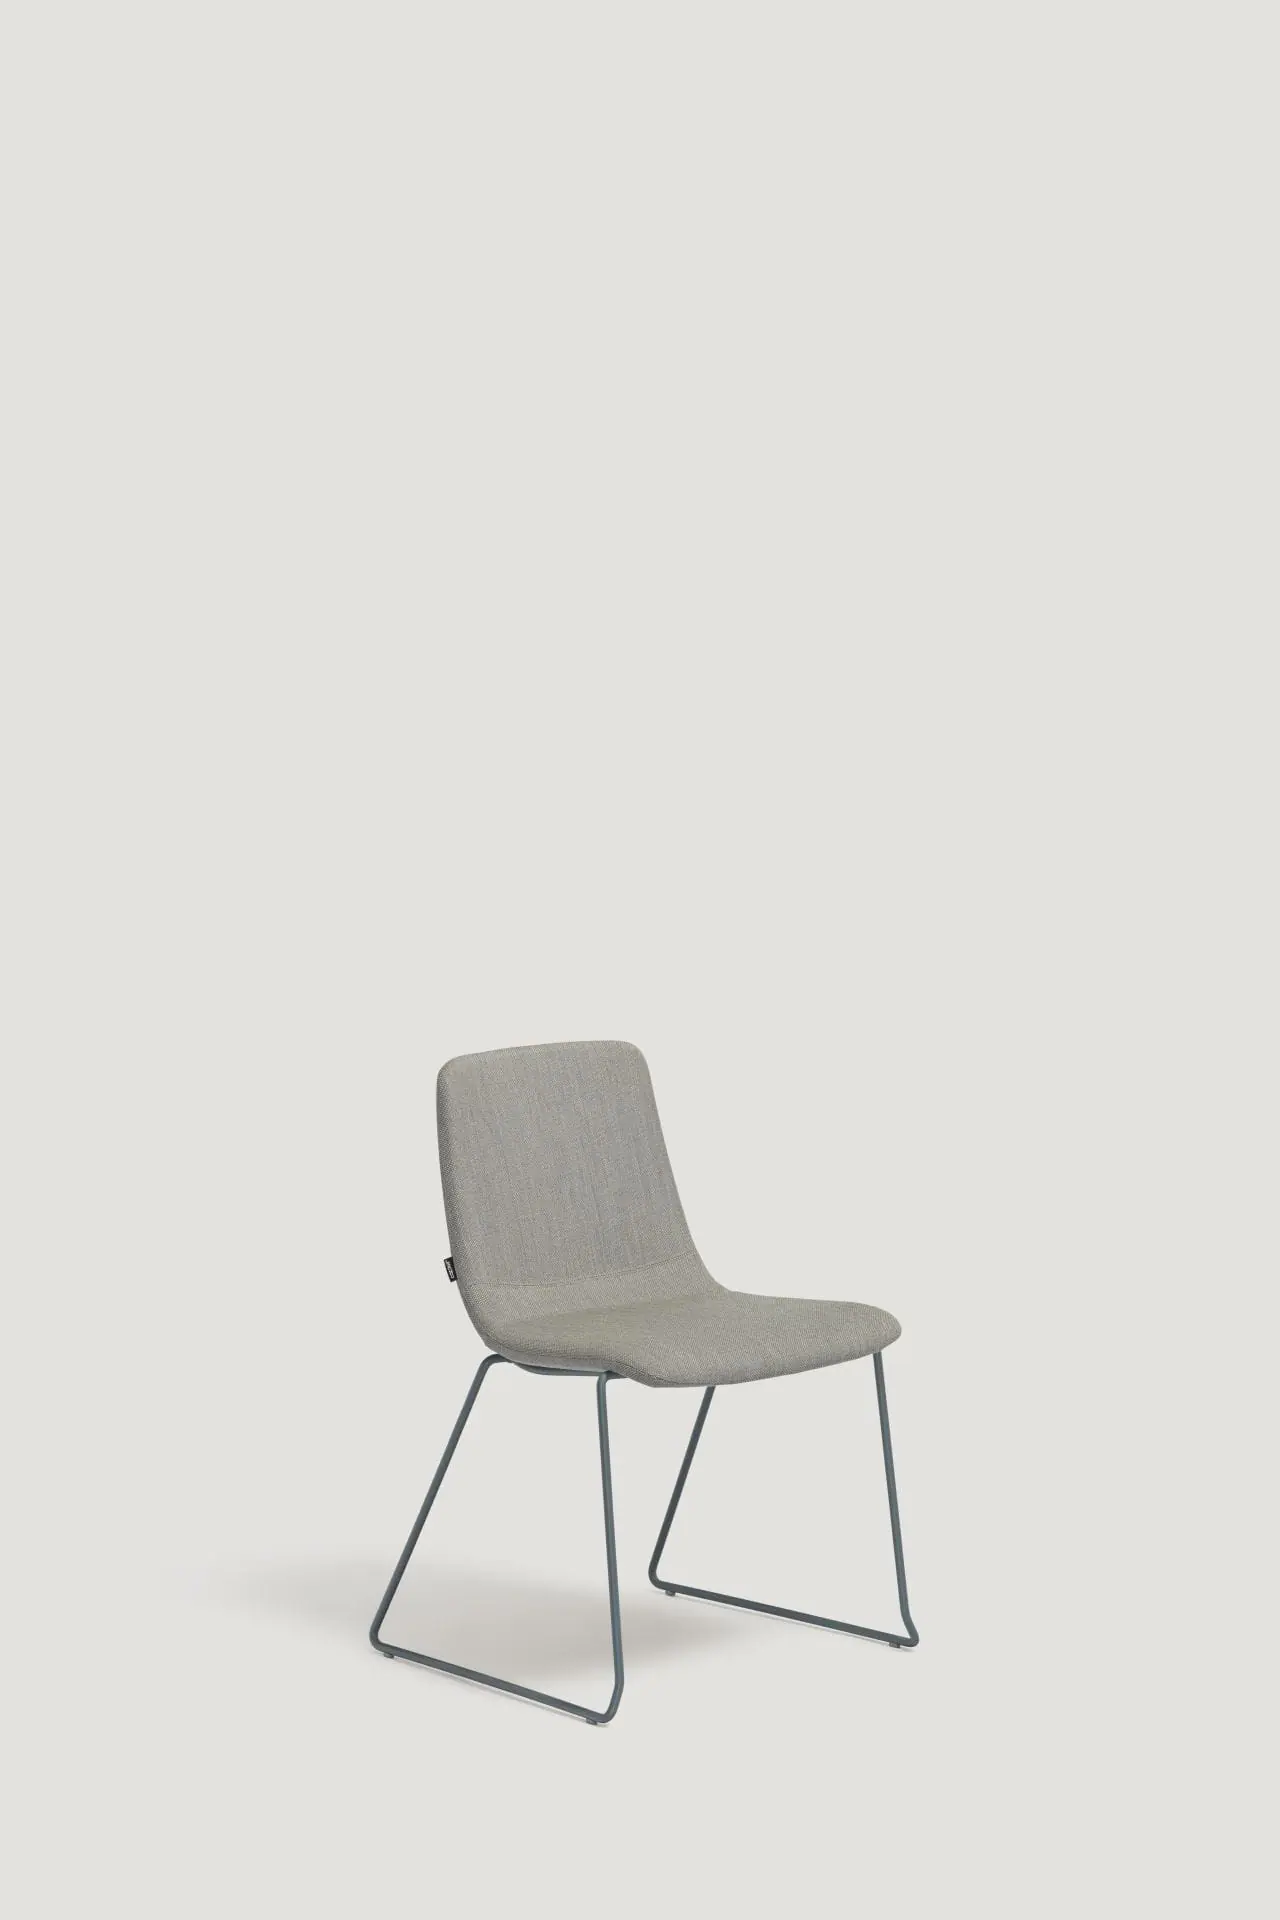 capdell-ics-chair-04